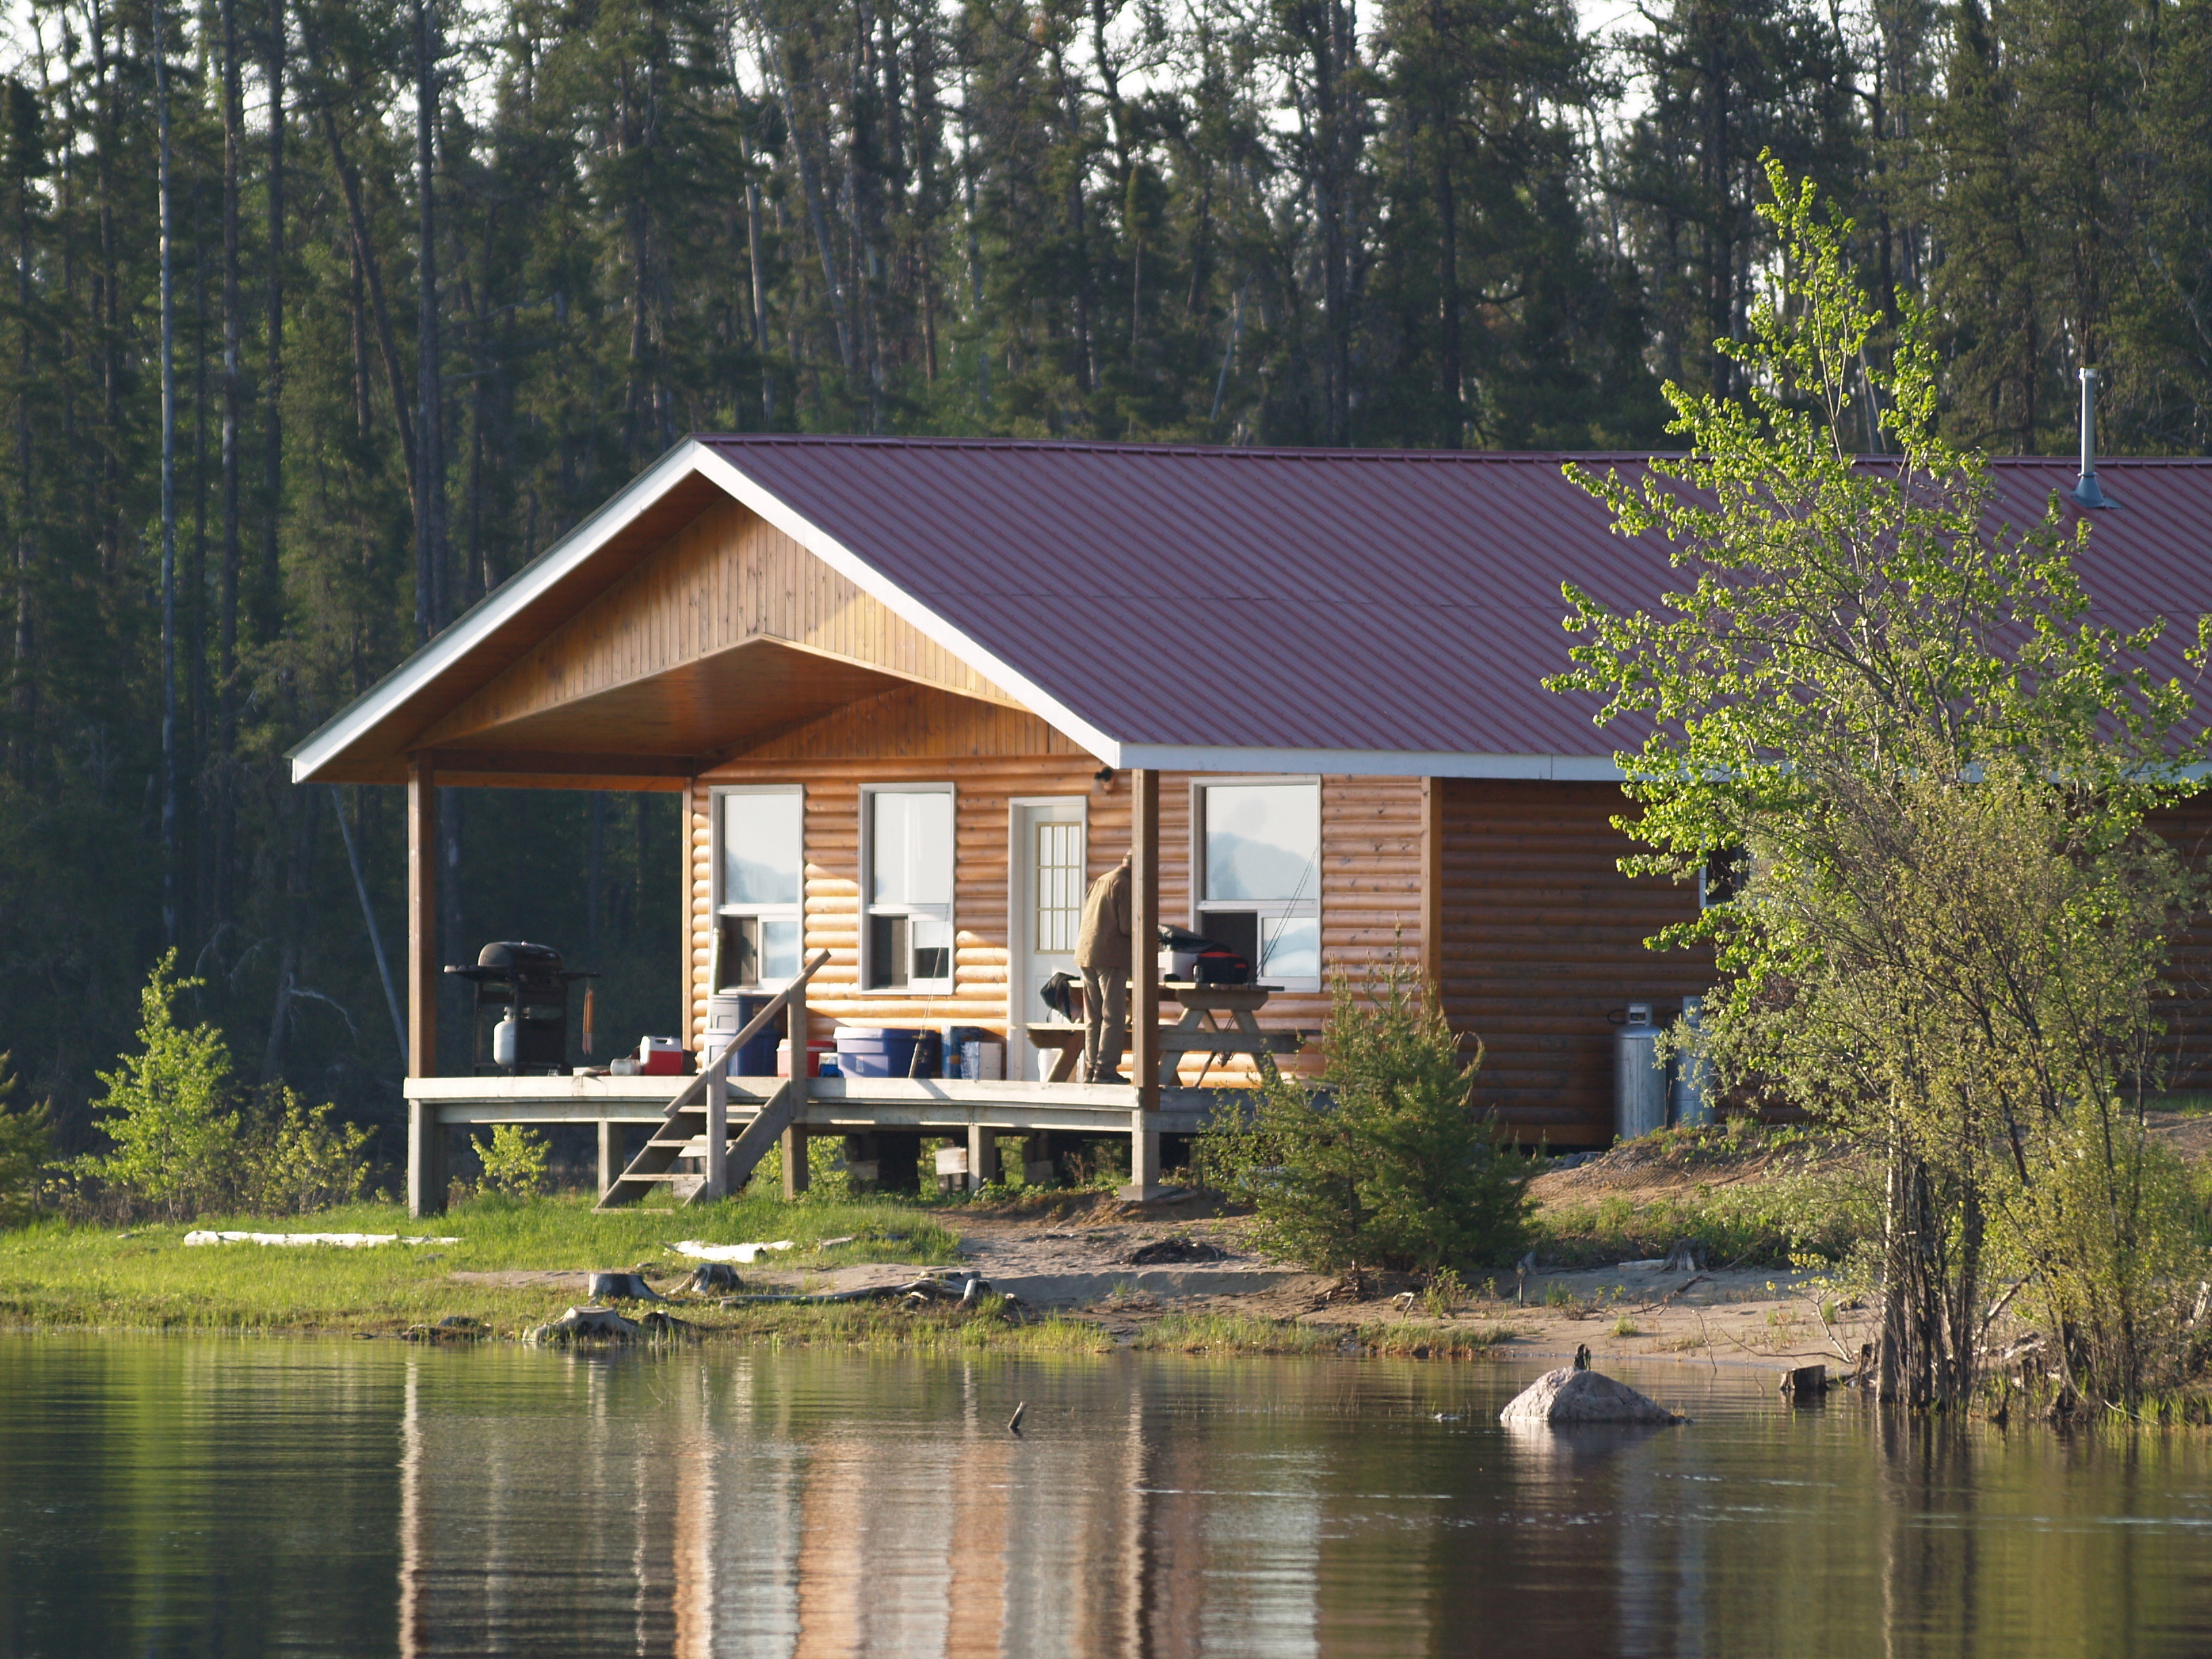 Stay at a remote outpost cabin while fishing in Ontario